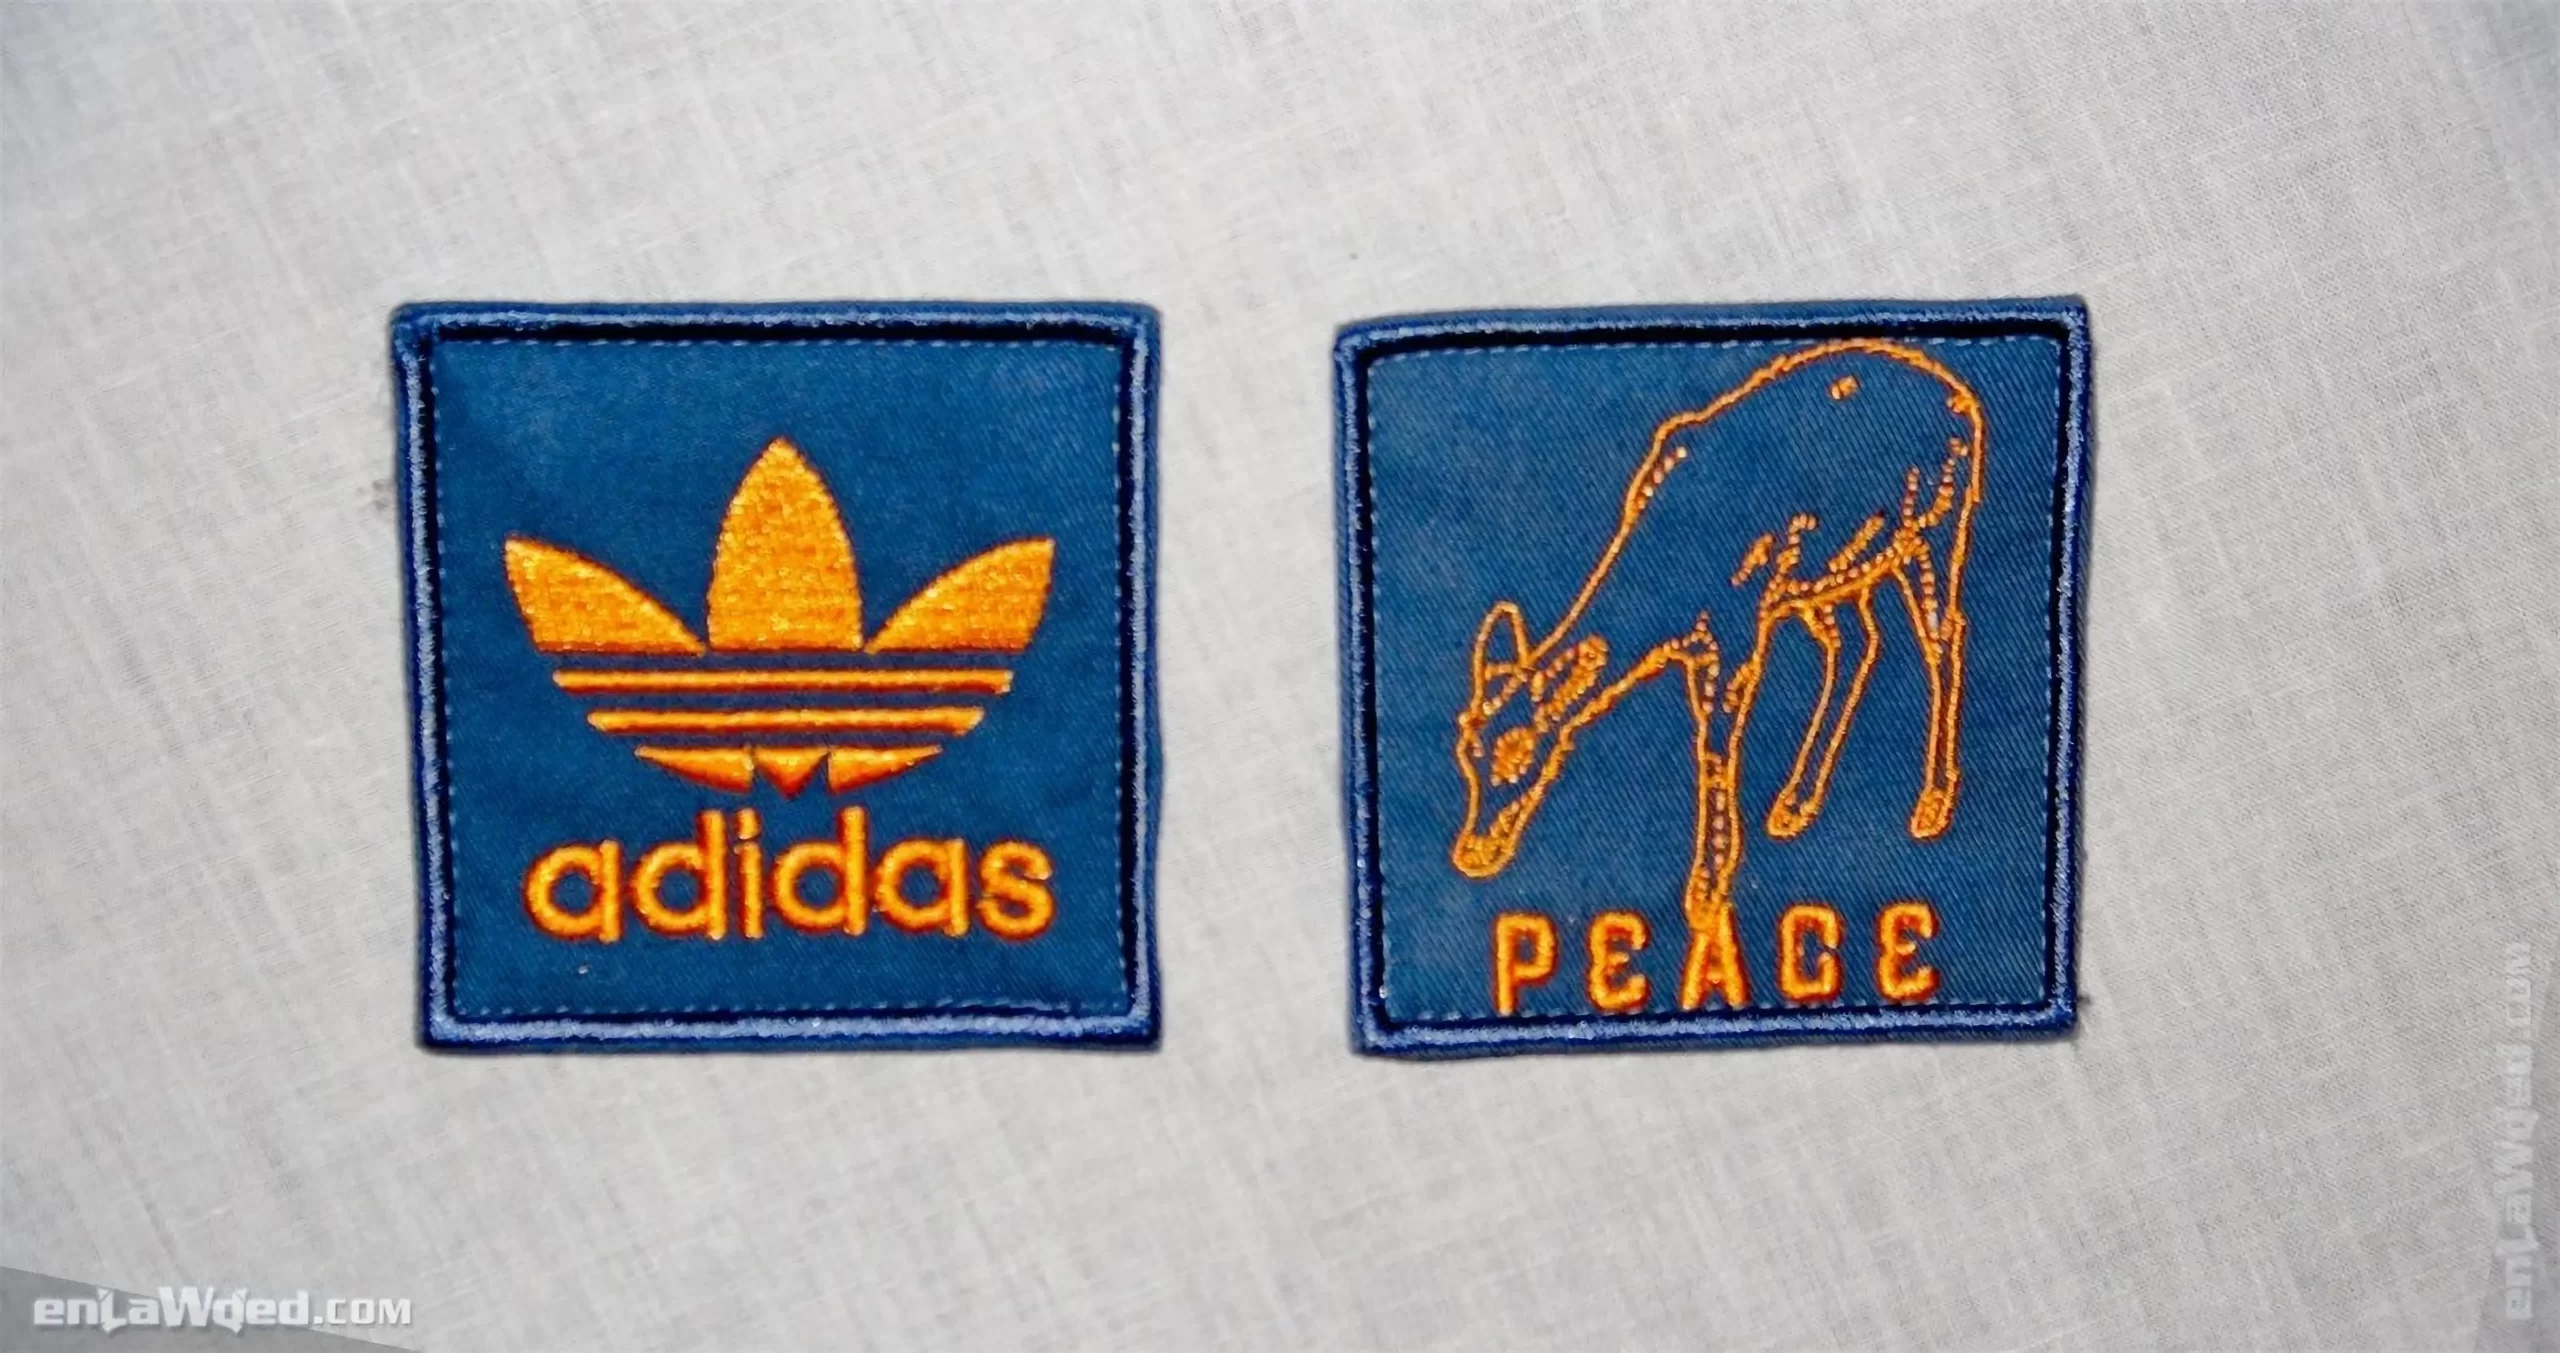 Men’s 2005 Adidas Originals Military Peace Jacket: Unstoppable (EnLawded.com file #lmchbwi3qlem81kp6s)